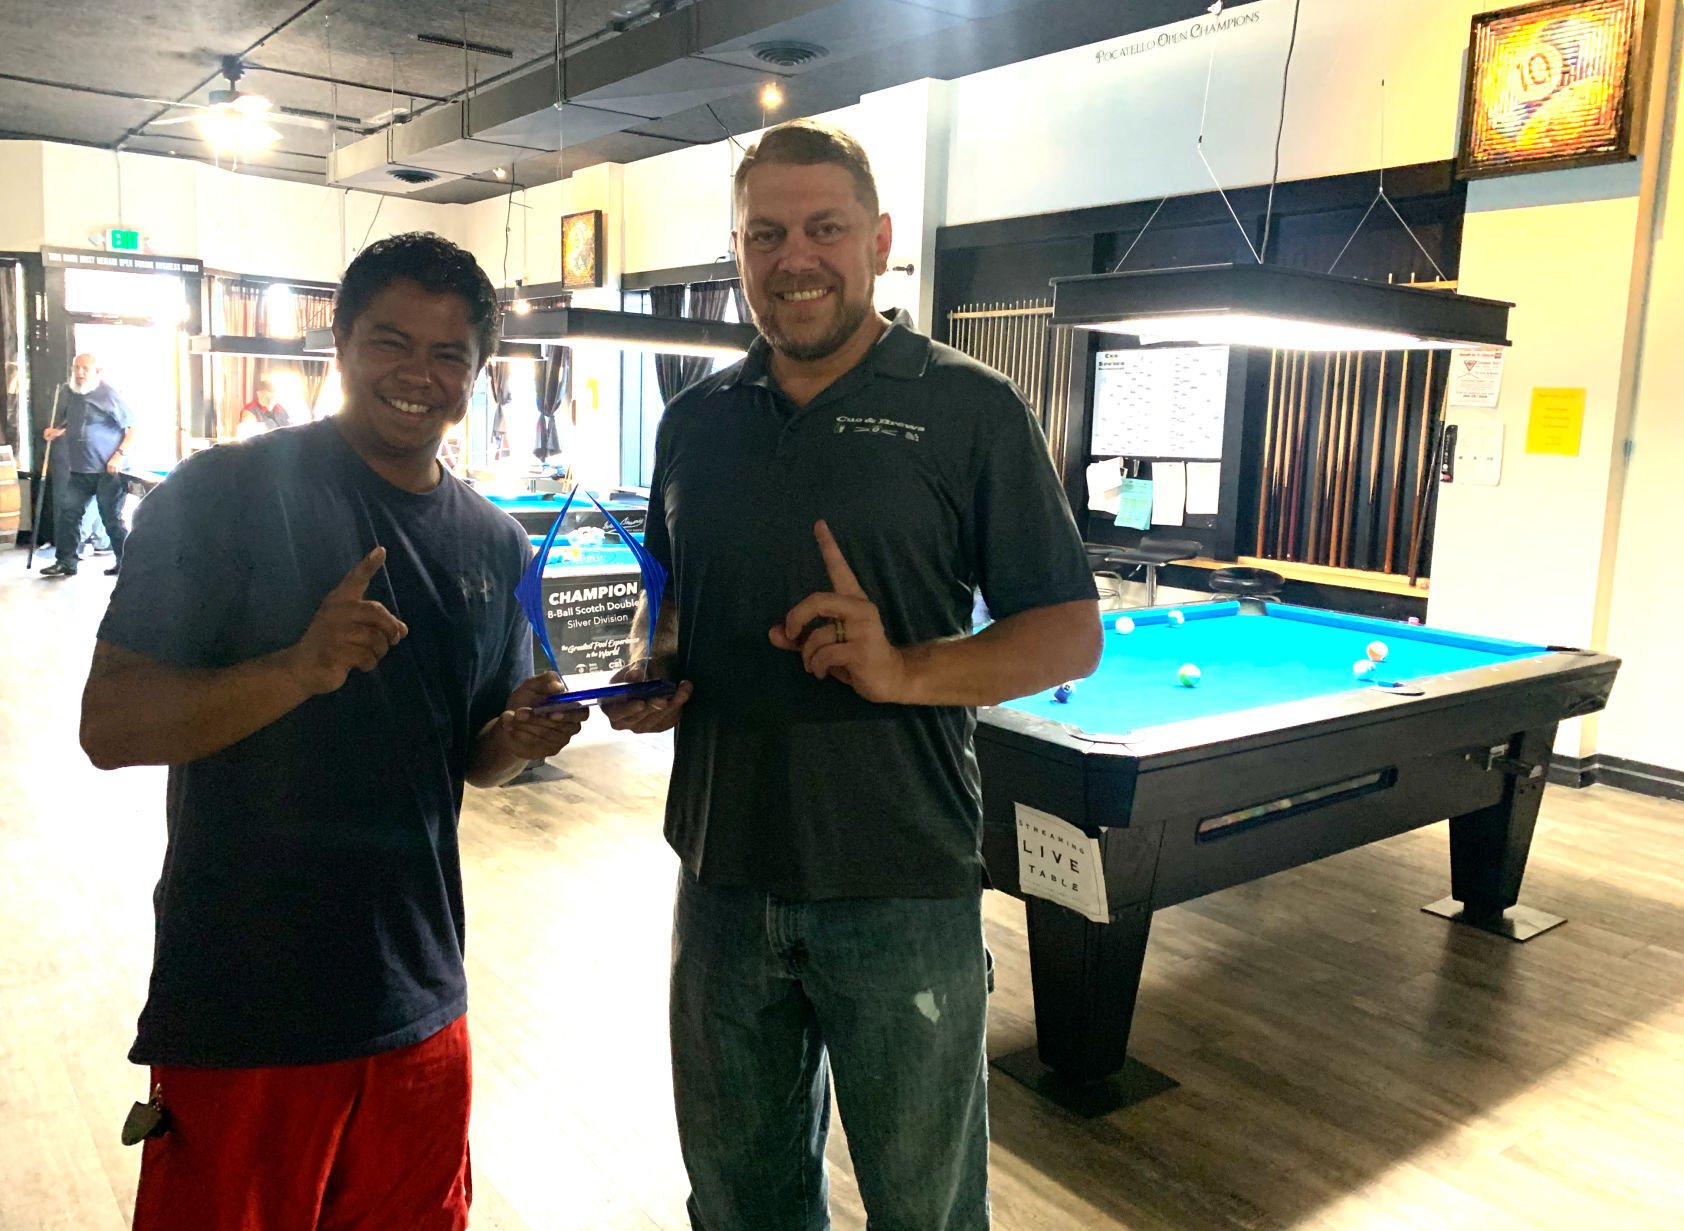 Local billiards players take first in division at pool world championships Local idahostatejournal